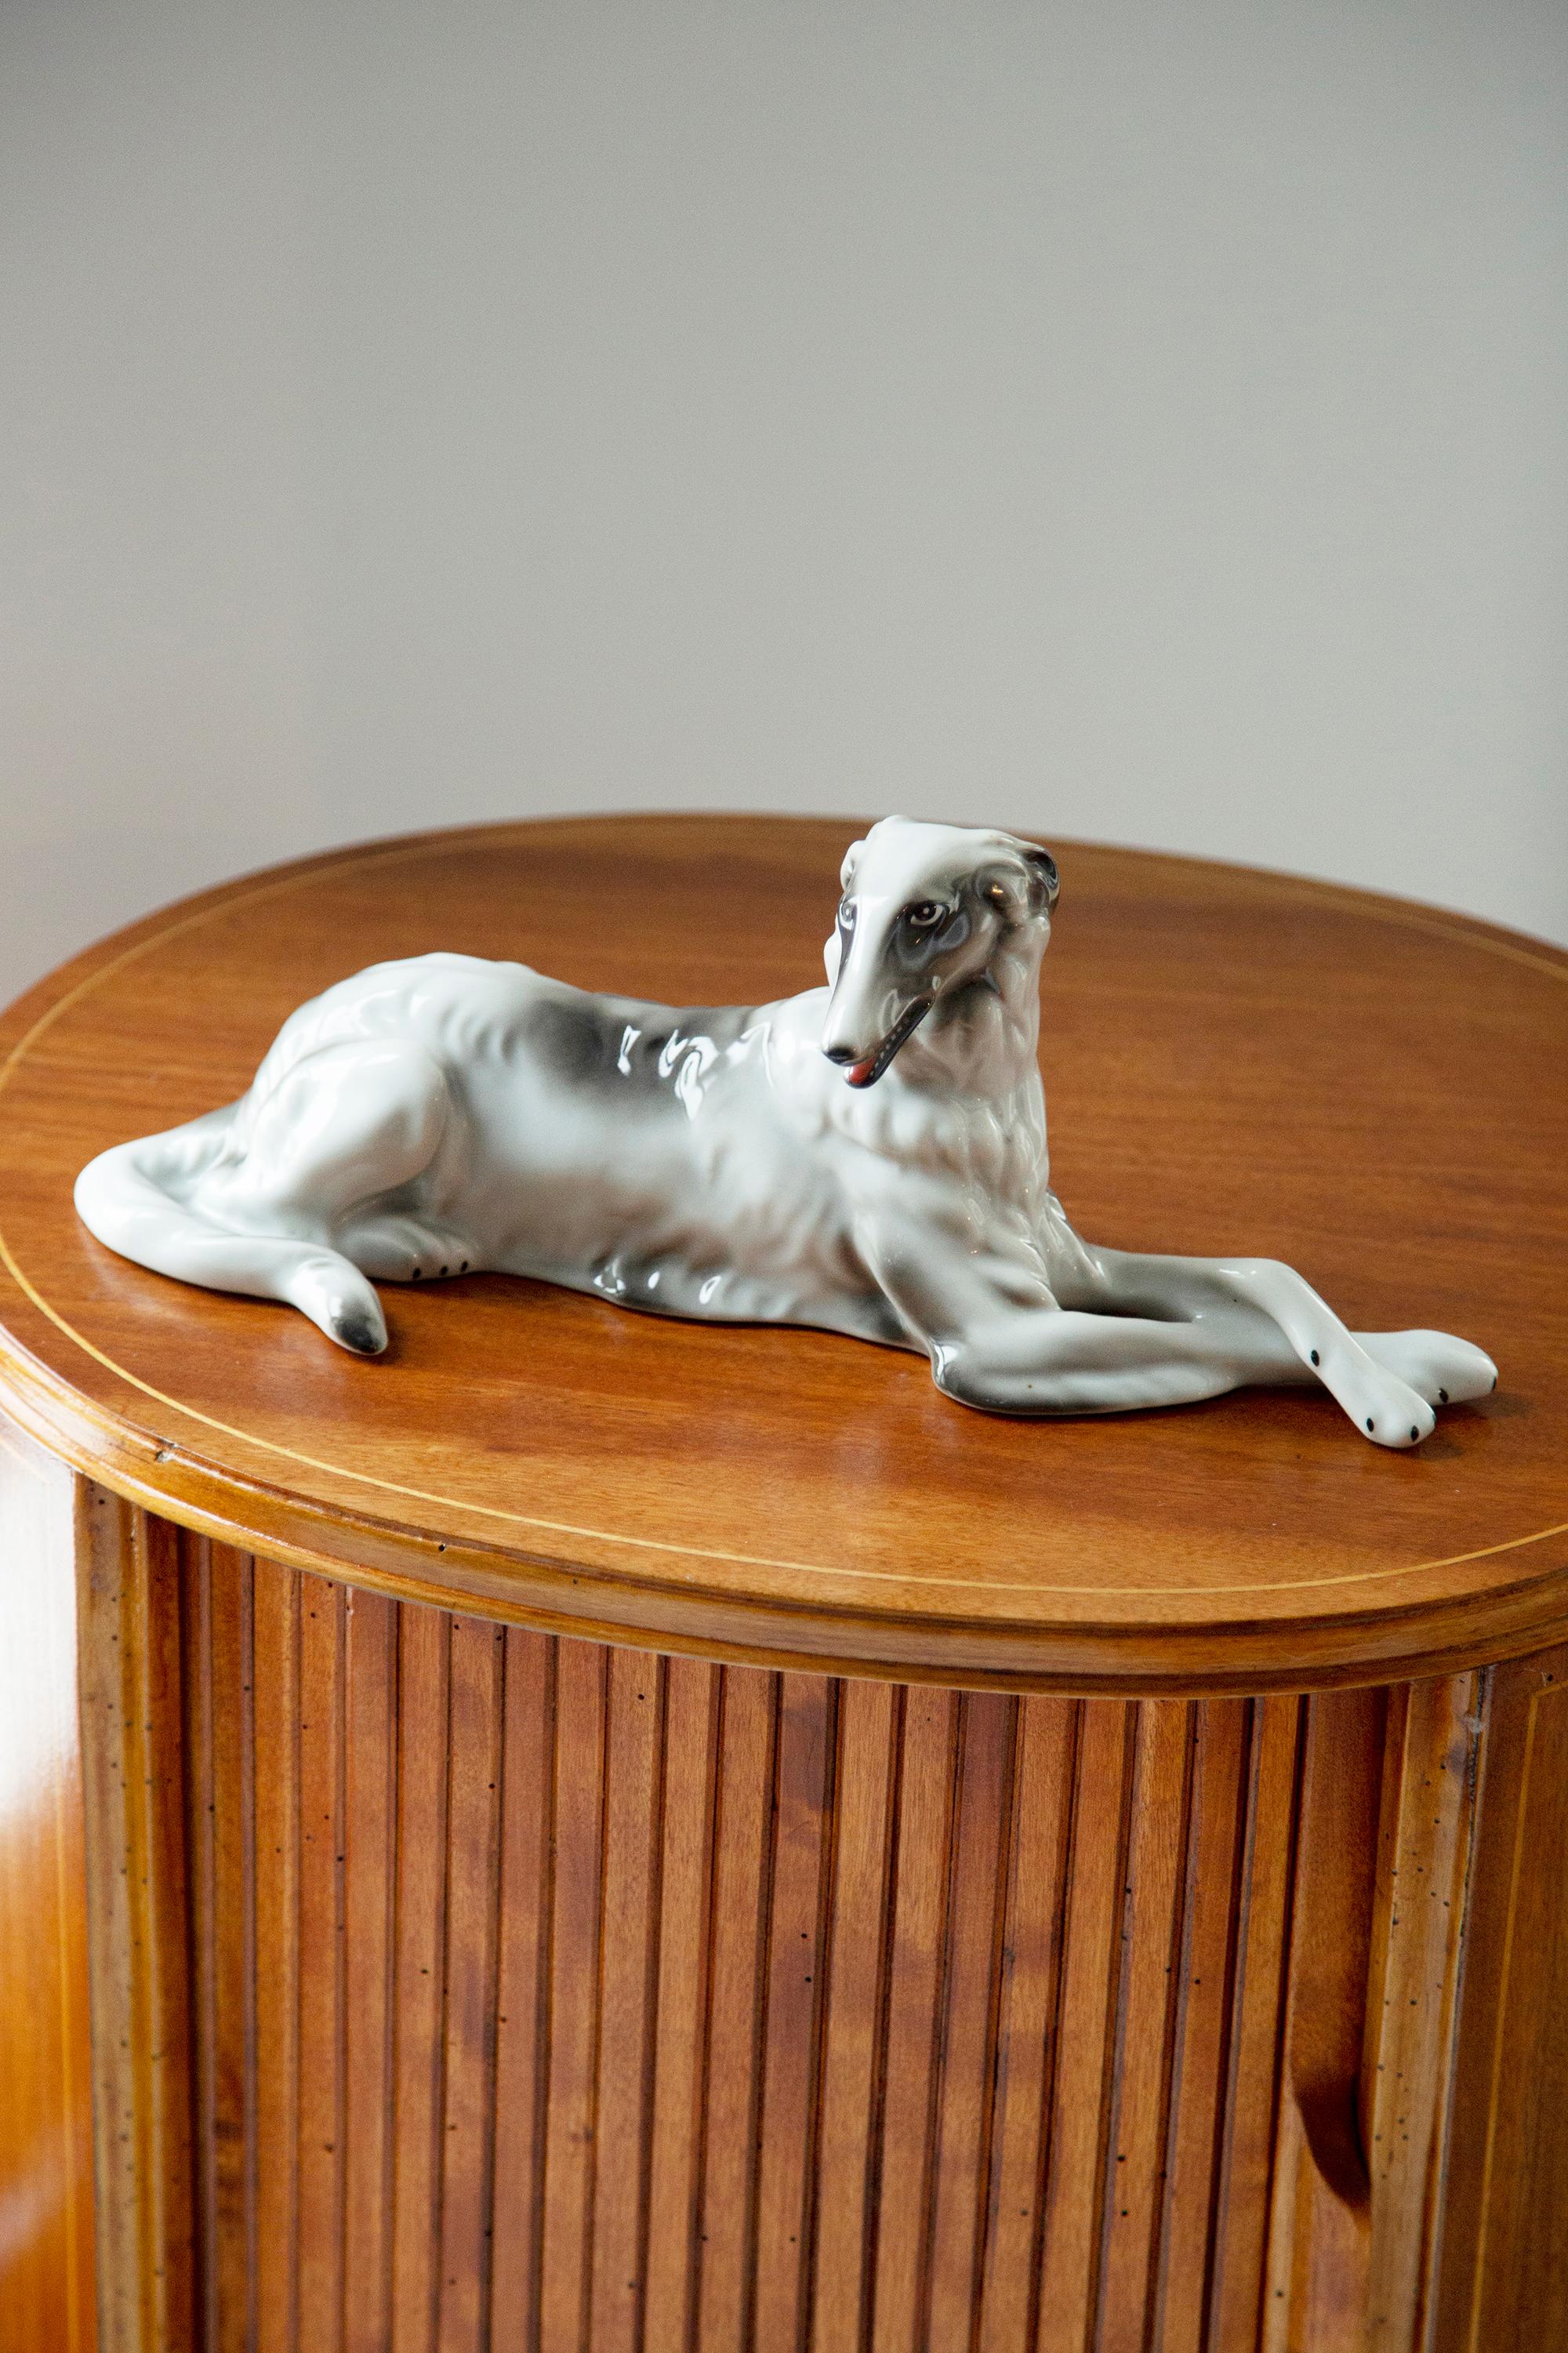 Painted ceramic, very good original vintage condition. No damages or cracks. Beautiful and unique decorative sculpture. Borzoi Dog Sculpture was produced in Poland. Only one dog available.